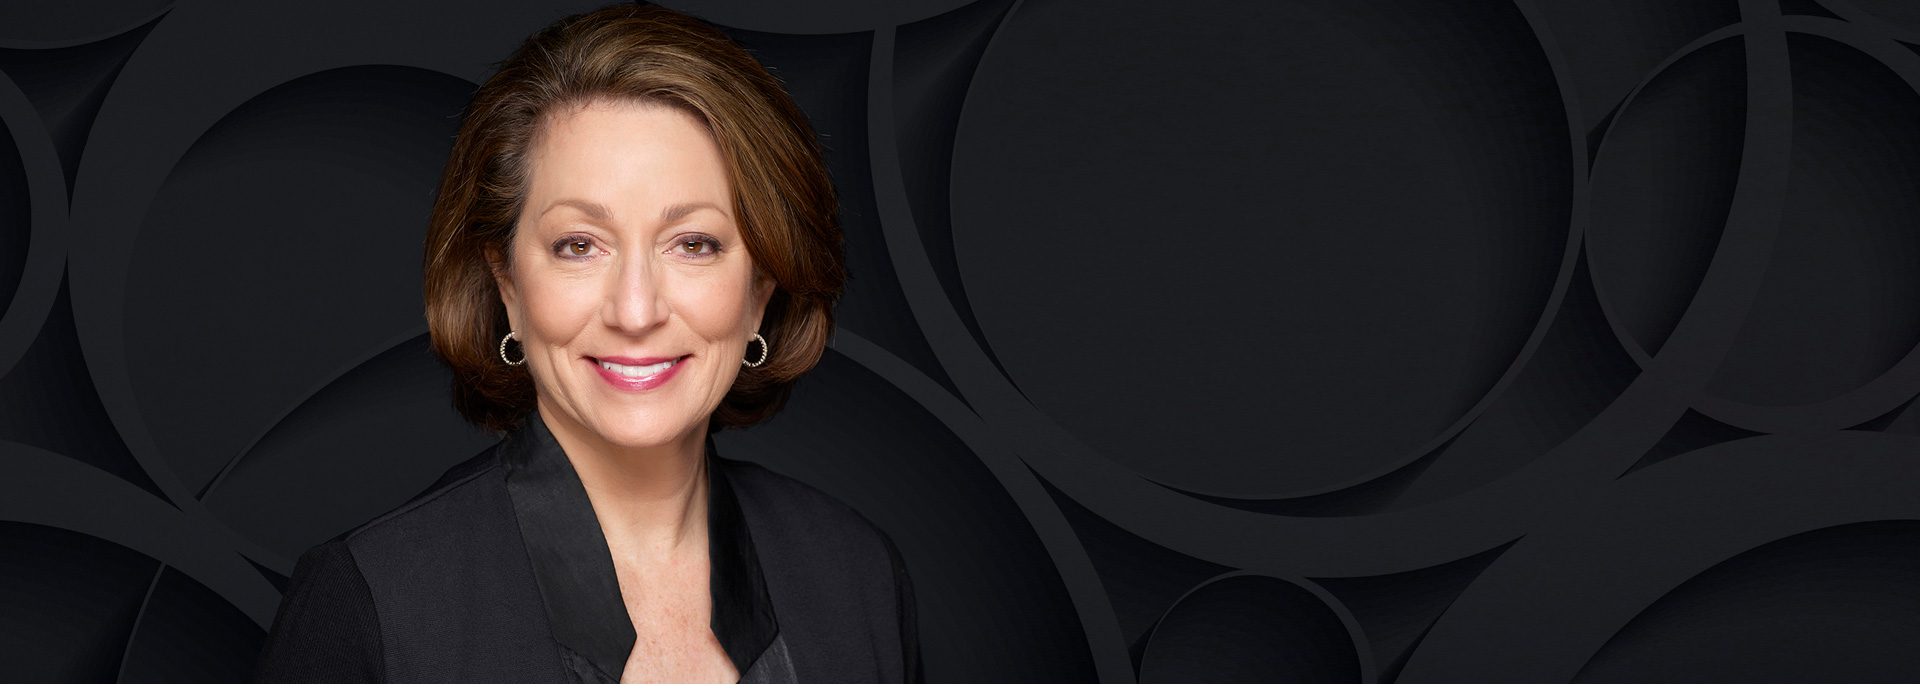 Susan Goldberg, editor in chief of National Geographic and editorial director of National Geographic Partners, will join Arizona State University with a joint appointment